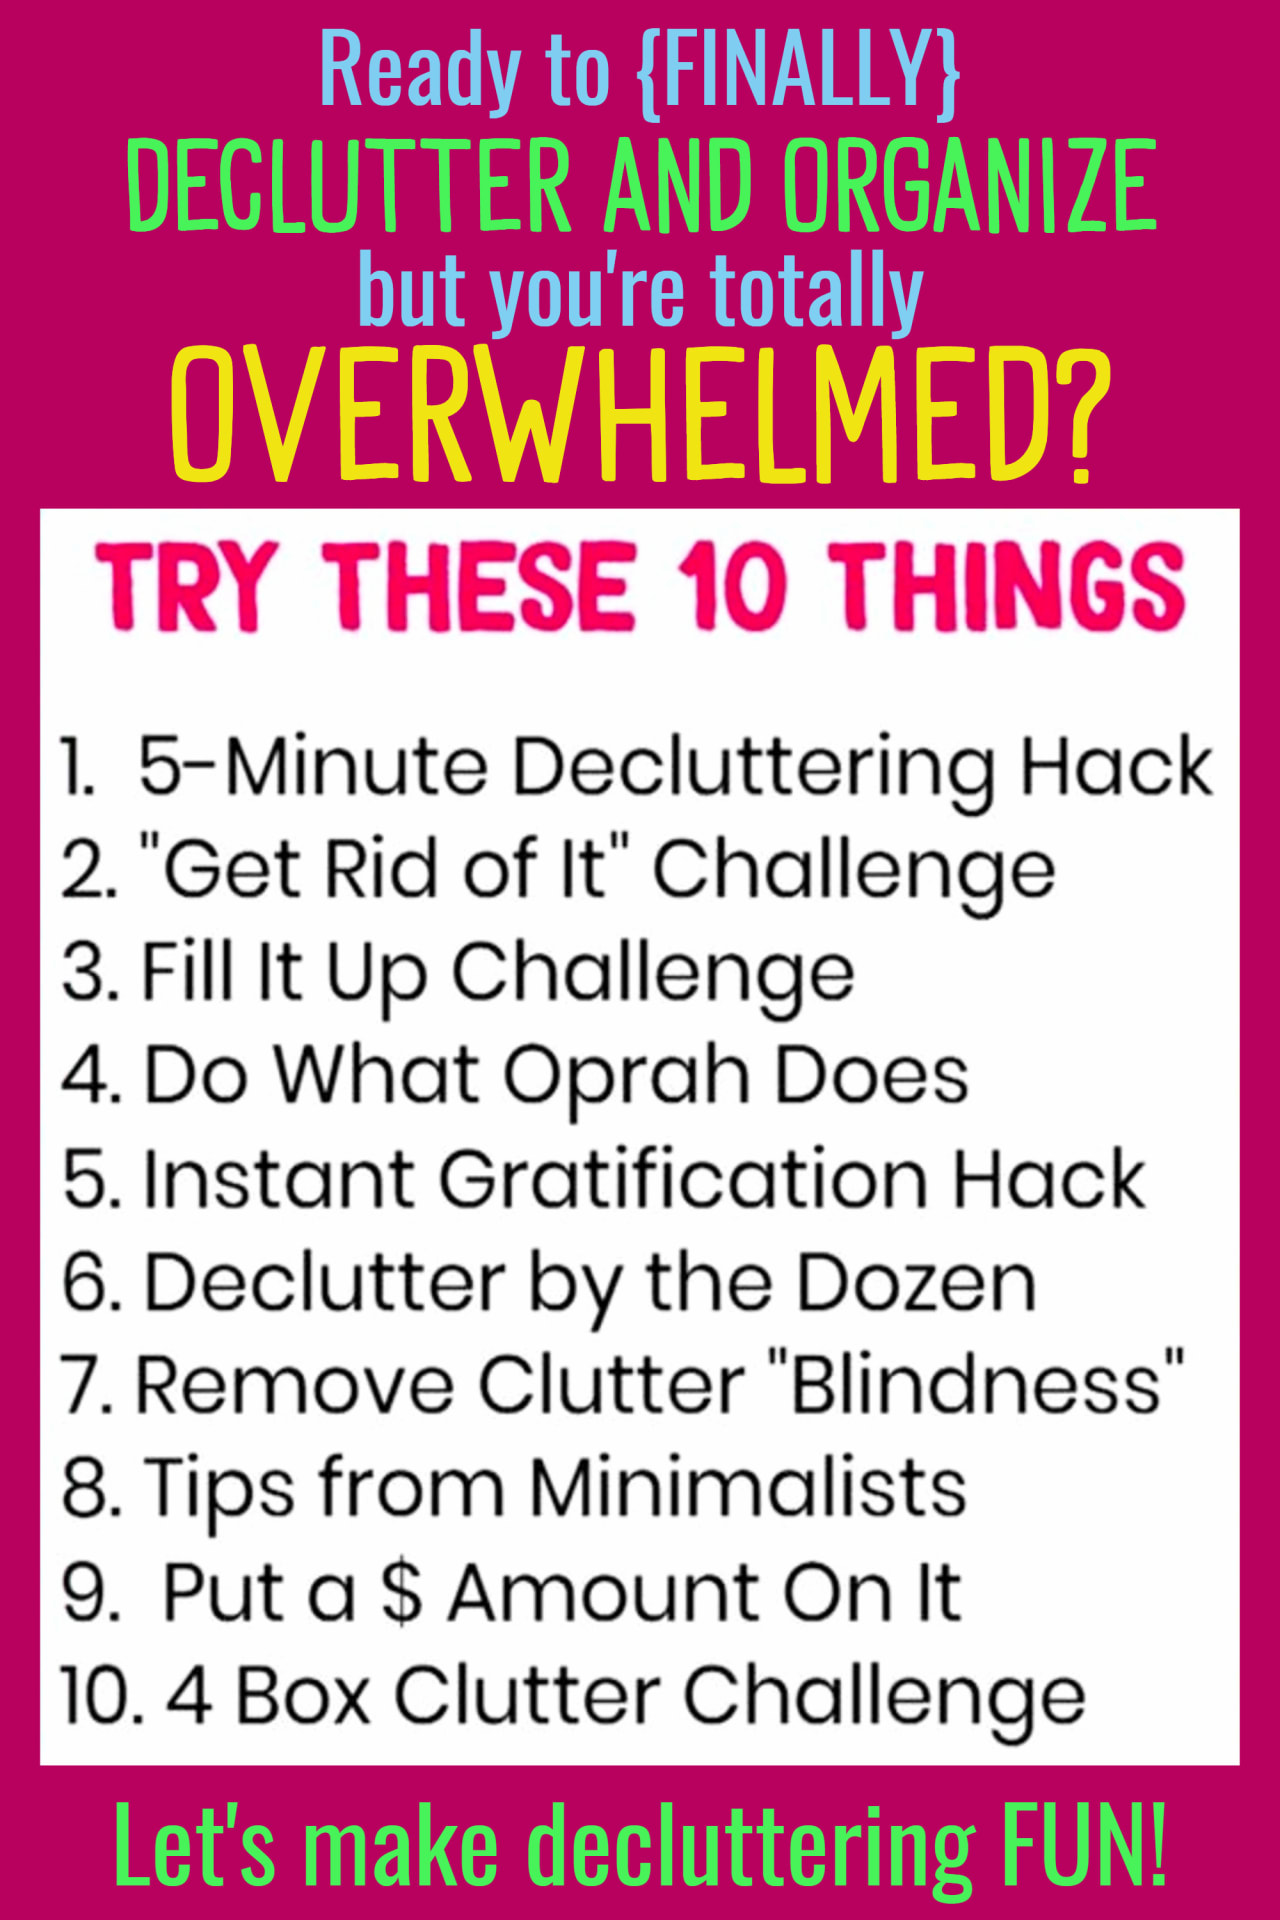 Easy decluttering tips - Organizing Ideas For The Home - Decluttering Ideas if you're feeling overwhelmed - where to start decluttering and organizing your messy house - decluttering step by step to declutter and organize without feeling overwhelmed